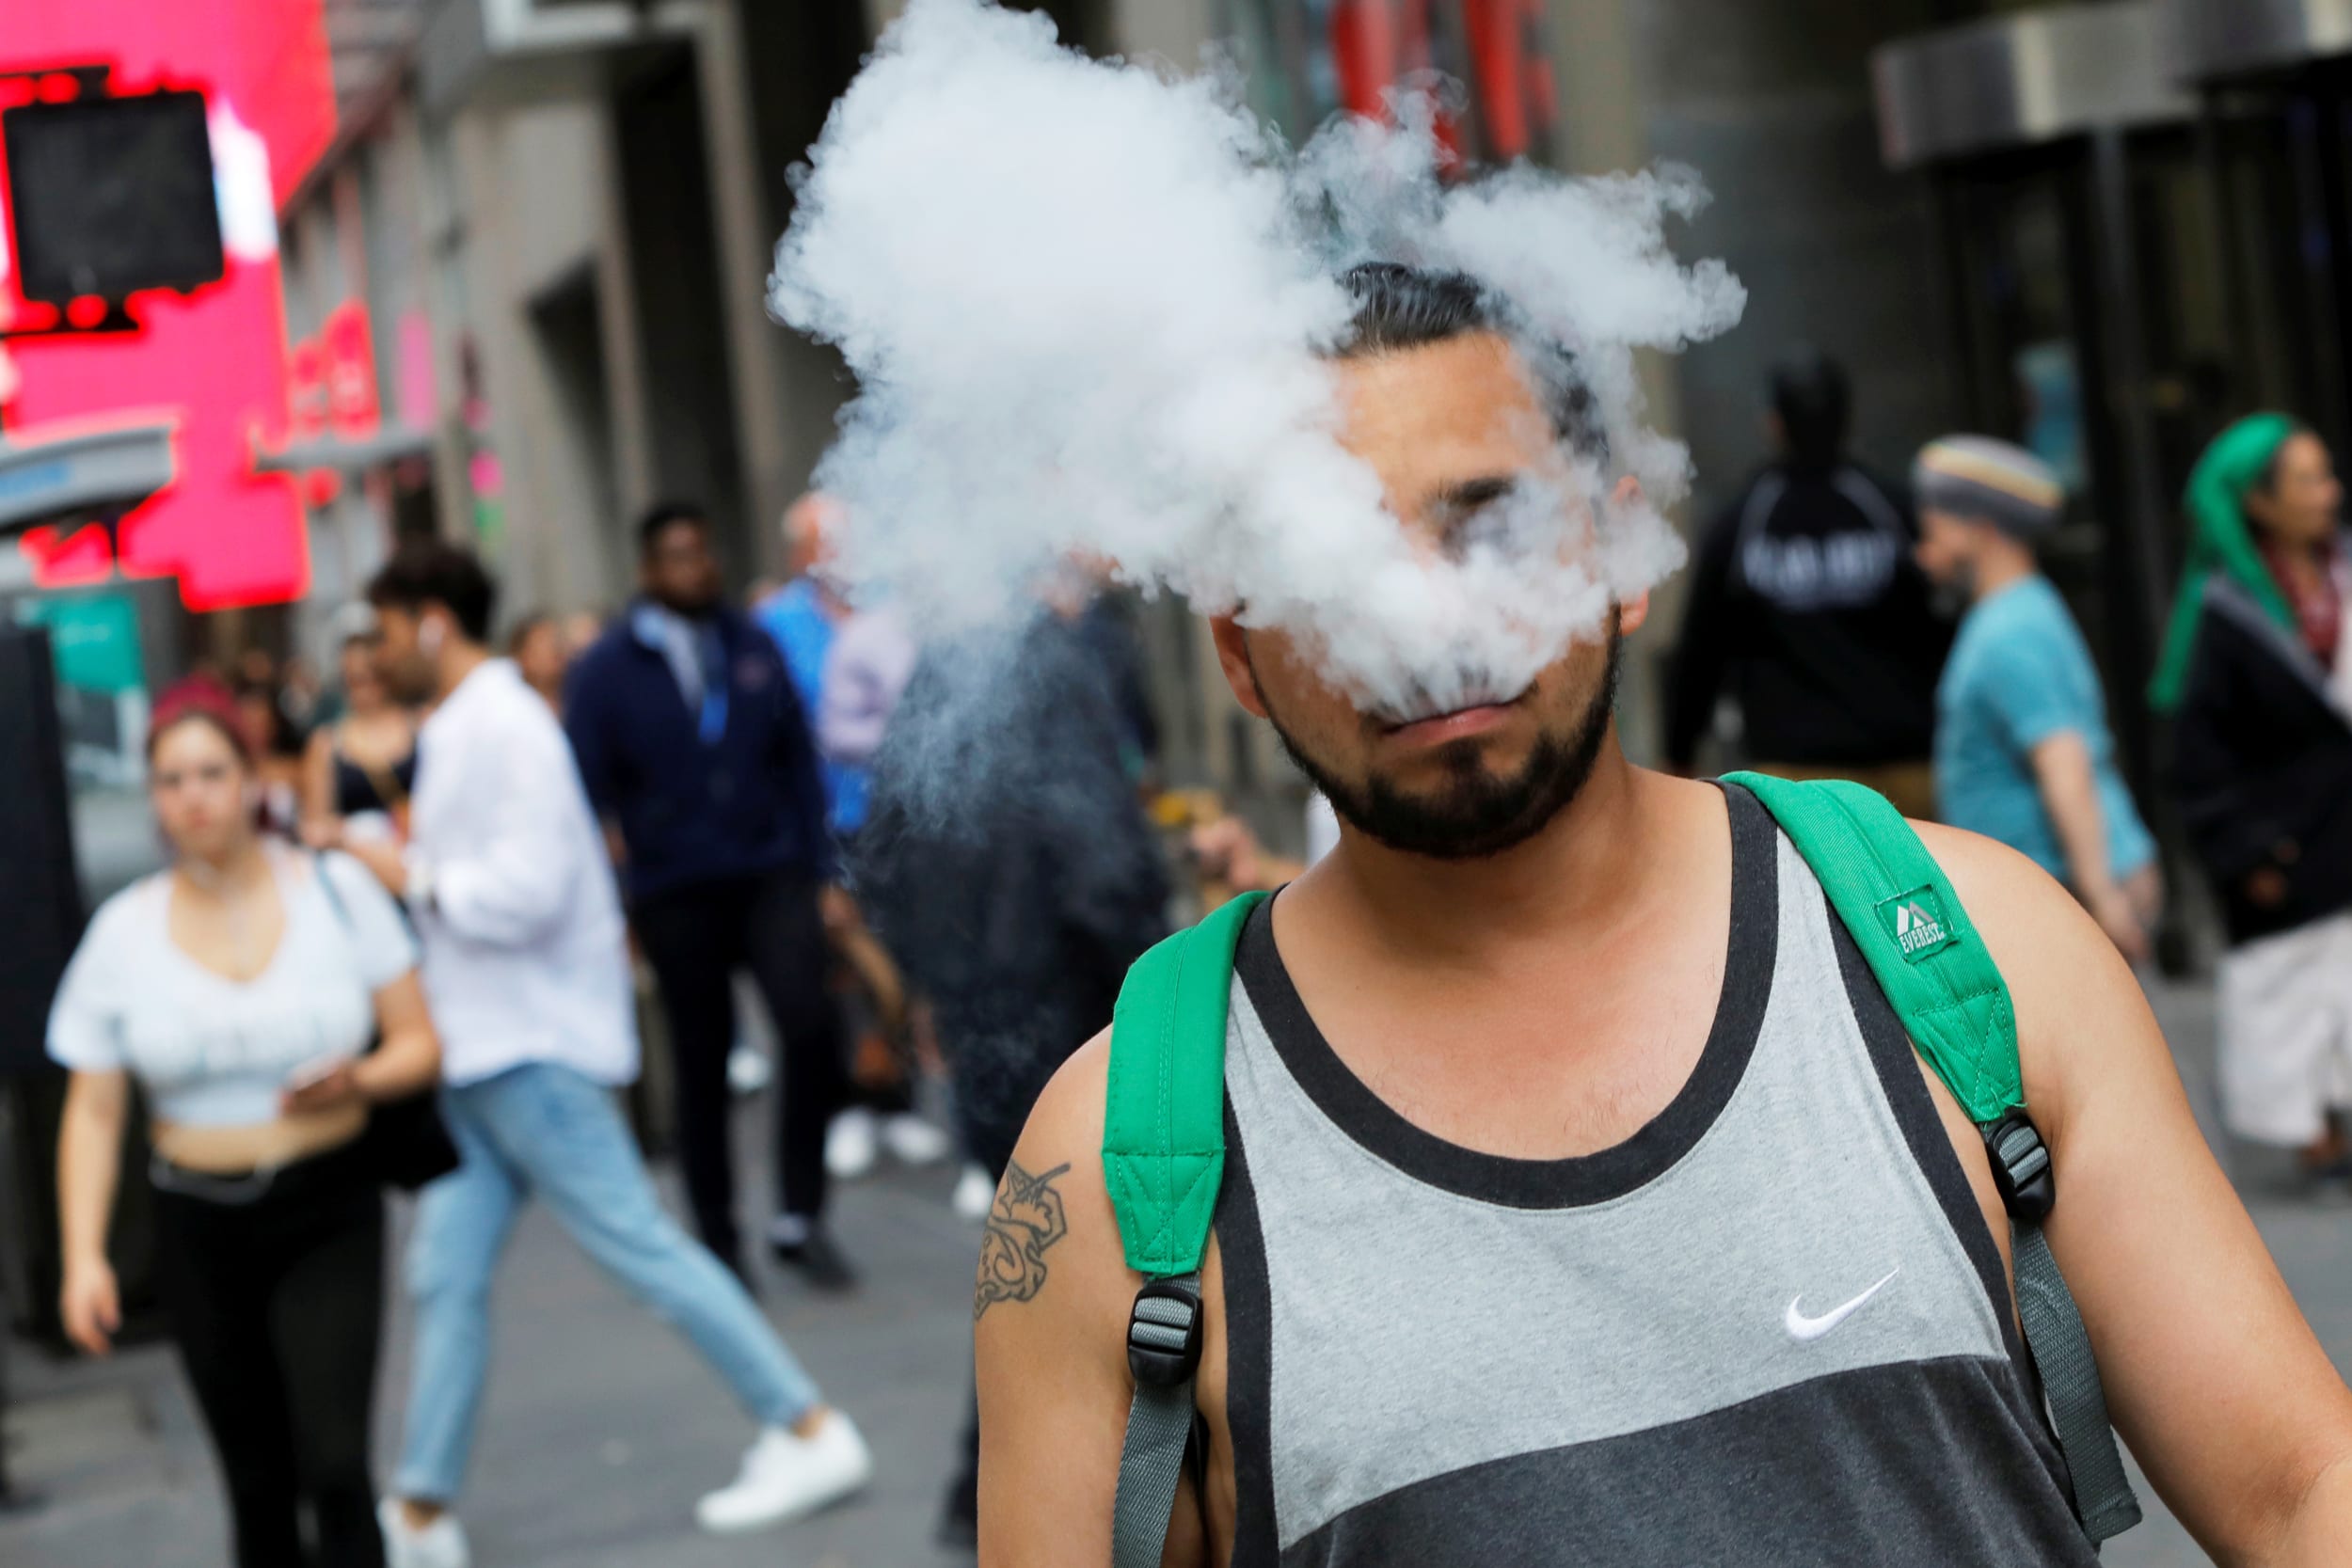 Vaping-related lung illnesses climb to 530 cases, seven deaths as CDC hunts for a cause